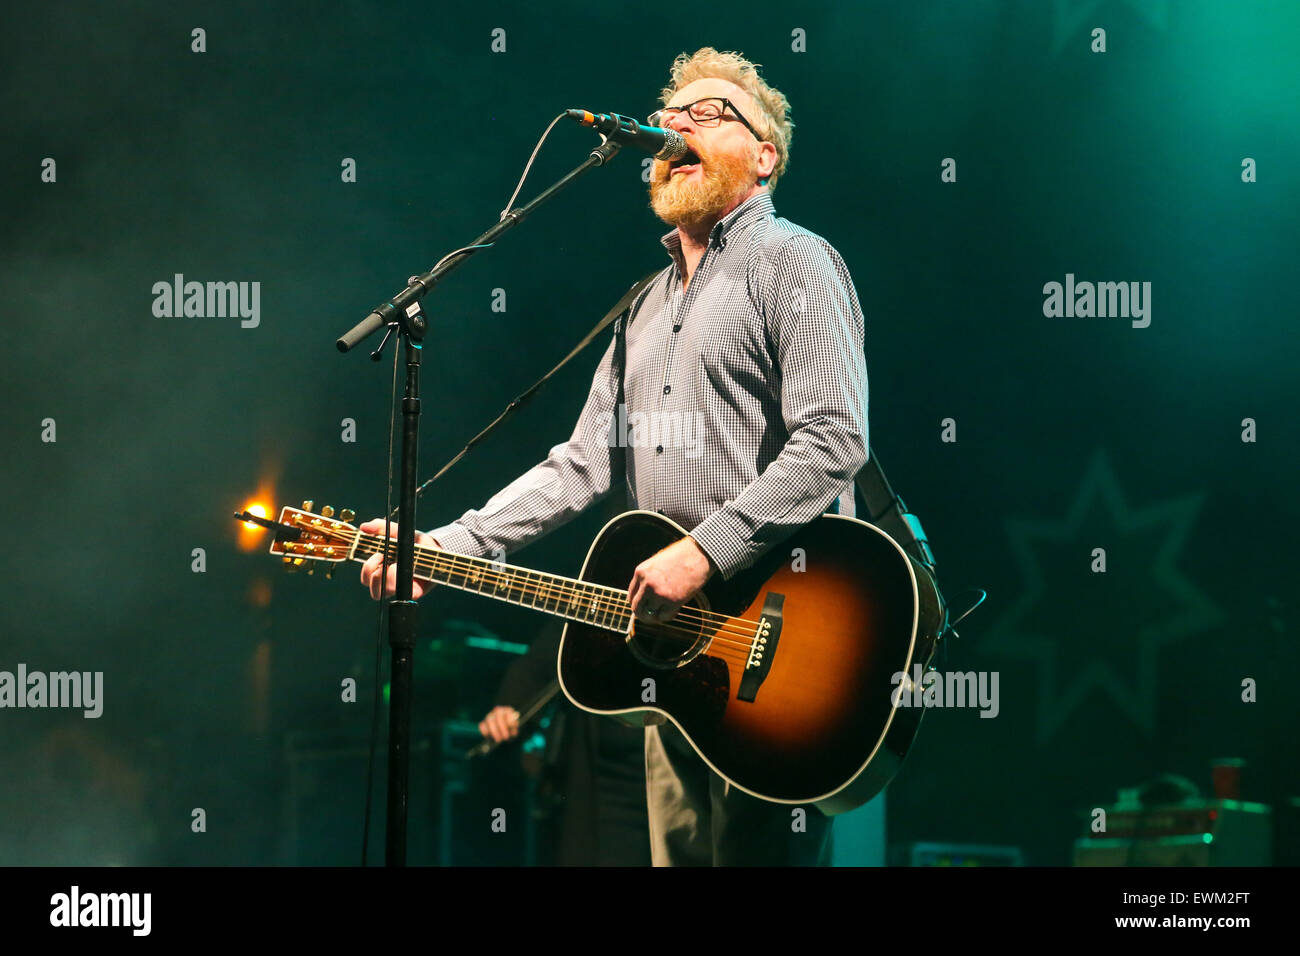 Raleigh, North Carolina, USA. 16th June, 2015. Music Artist FLOGGING MOLLY performs at the Red Hat Amphitheater in North Carolina. Flogging Molly is an American seven-piece Irish punk band from Los Angeles, California led by Irish vocalist Dave King, known for his work with Fastway. They are signed to their own record label, Borstal Beat Records. © Andy Martin Jr./ZUMA Wire/Alamy Live News Stock Photo